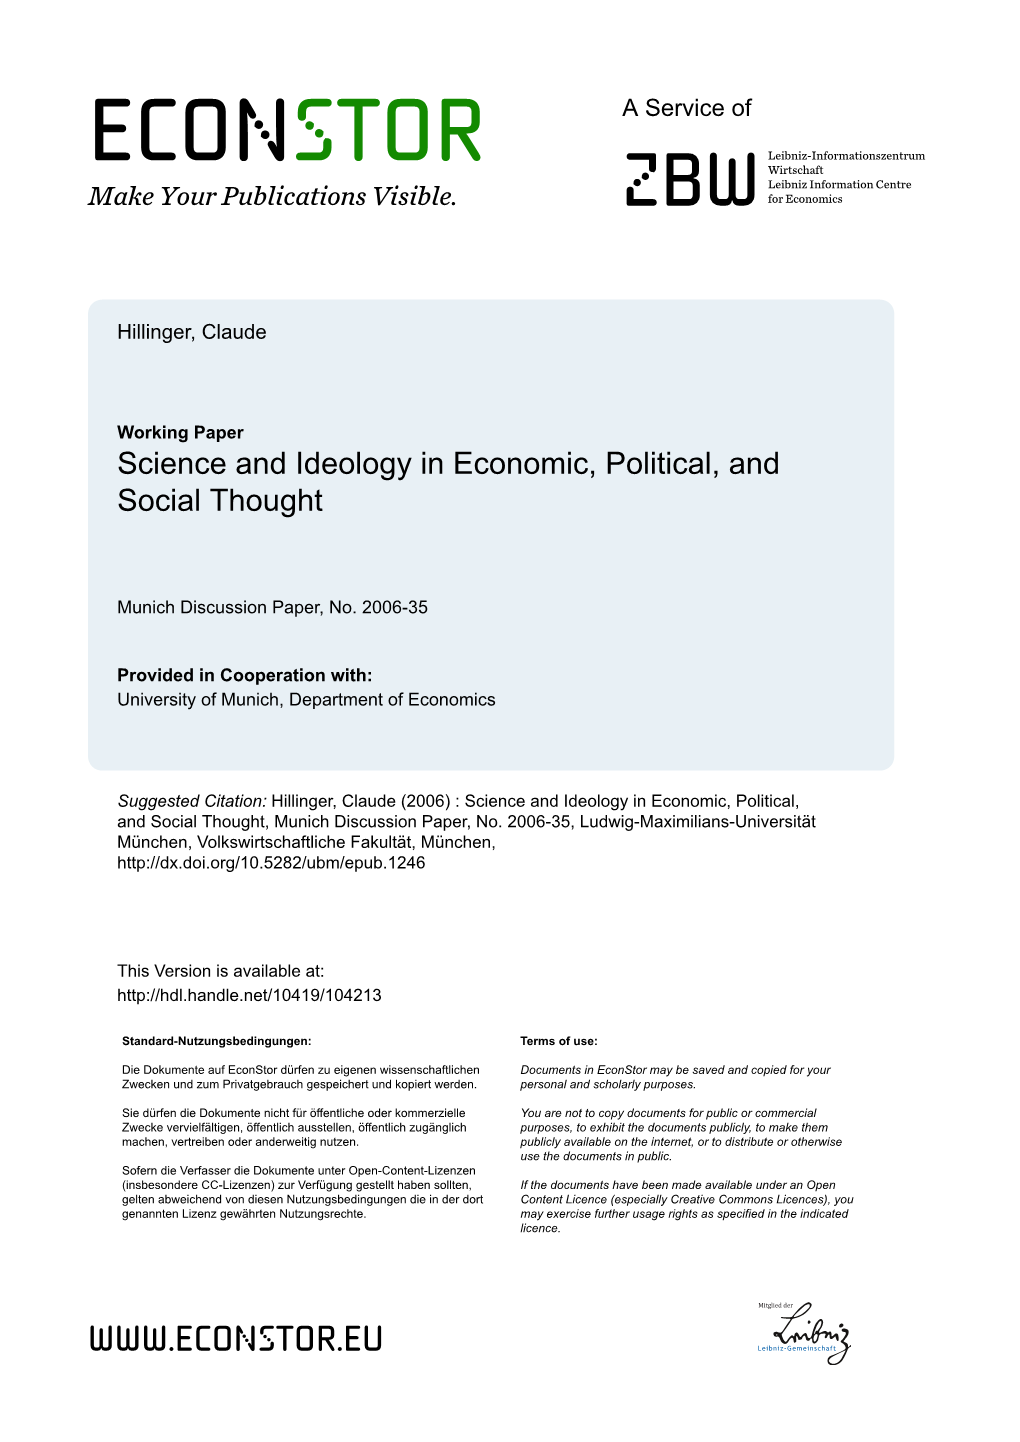 Science and Ideology in Economic, Political, and Social Thought